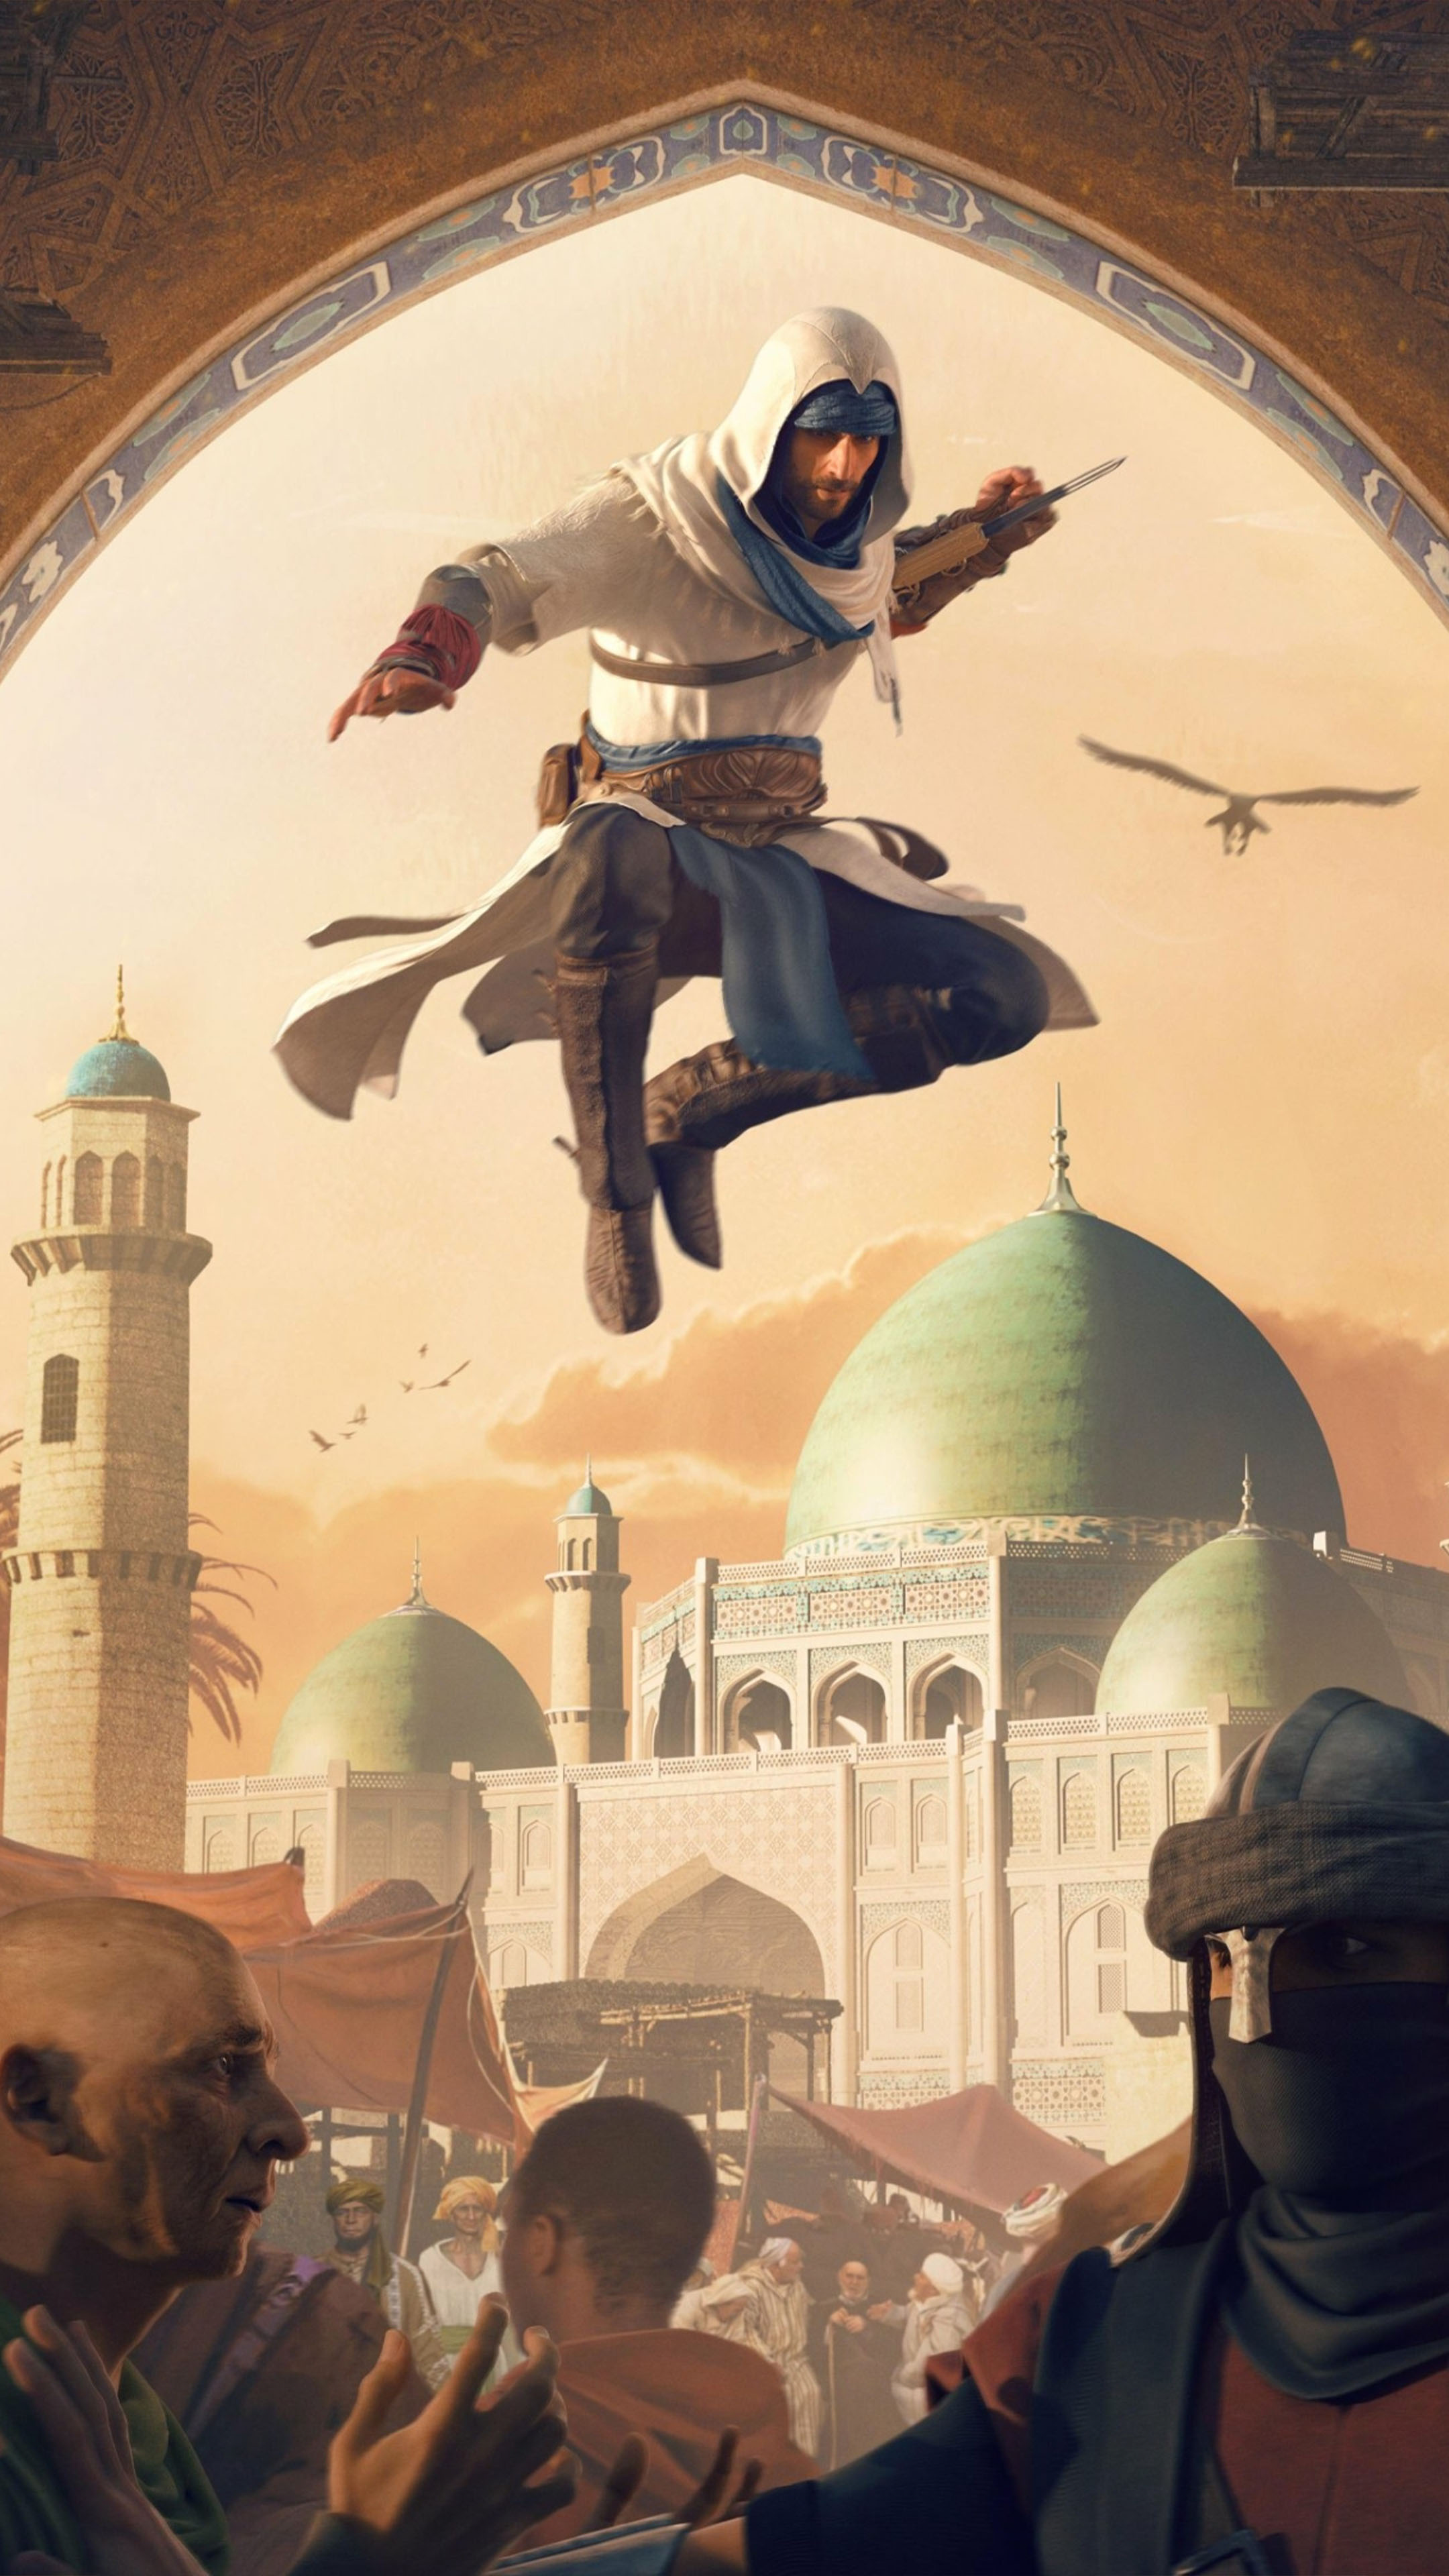 Assassin's Creed Mirage Game Poster 4K Ultra HD Mobile Wallpaper